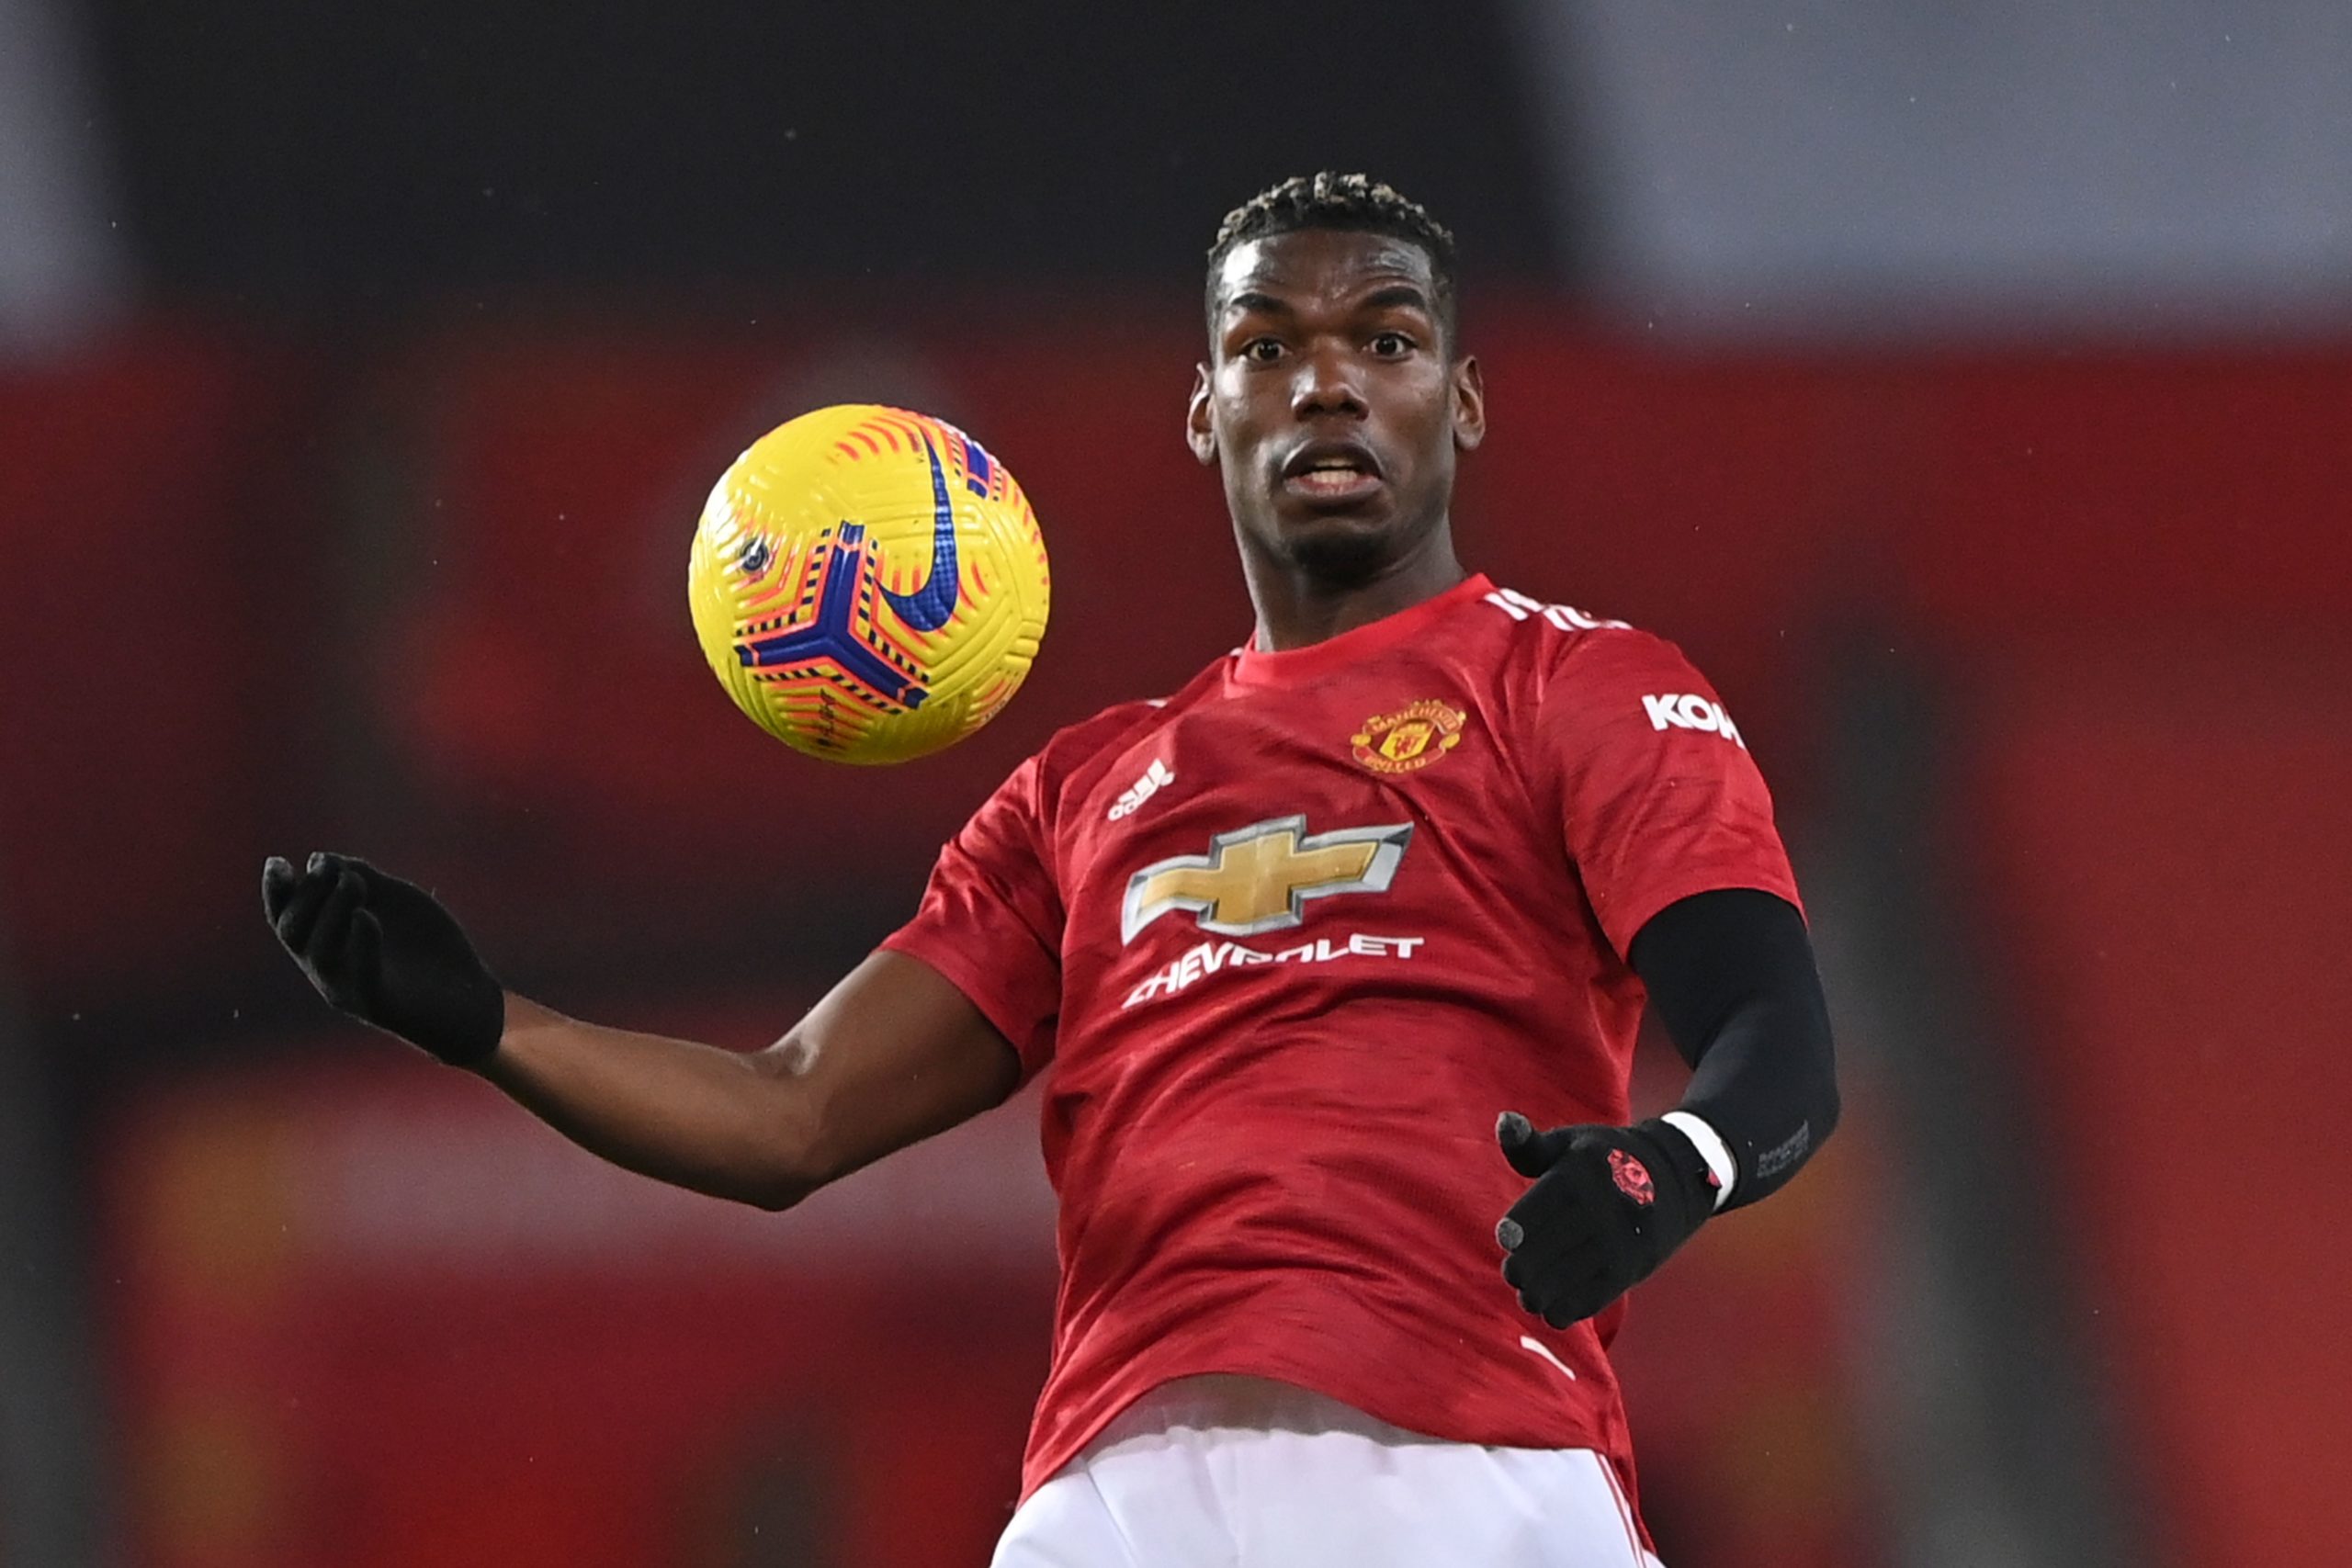 Manchester United midfielder Pogba open to prolonging his stay (Pogba is seen in the photo)